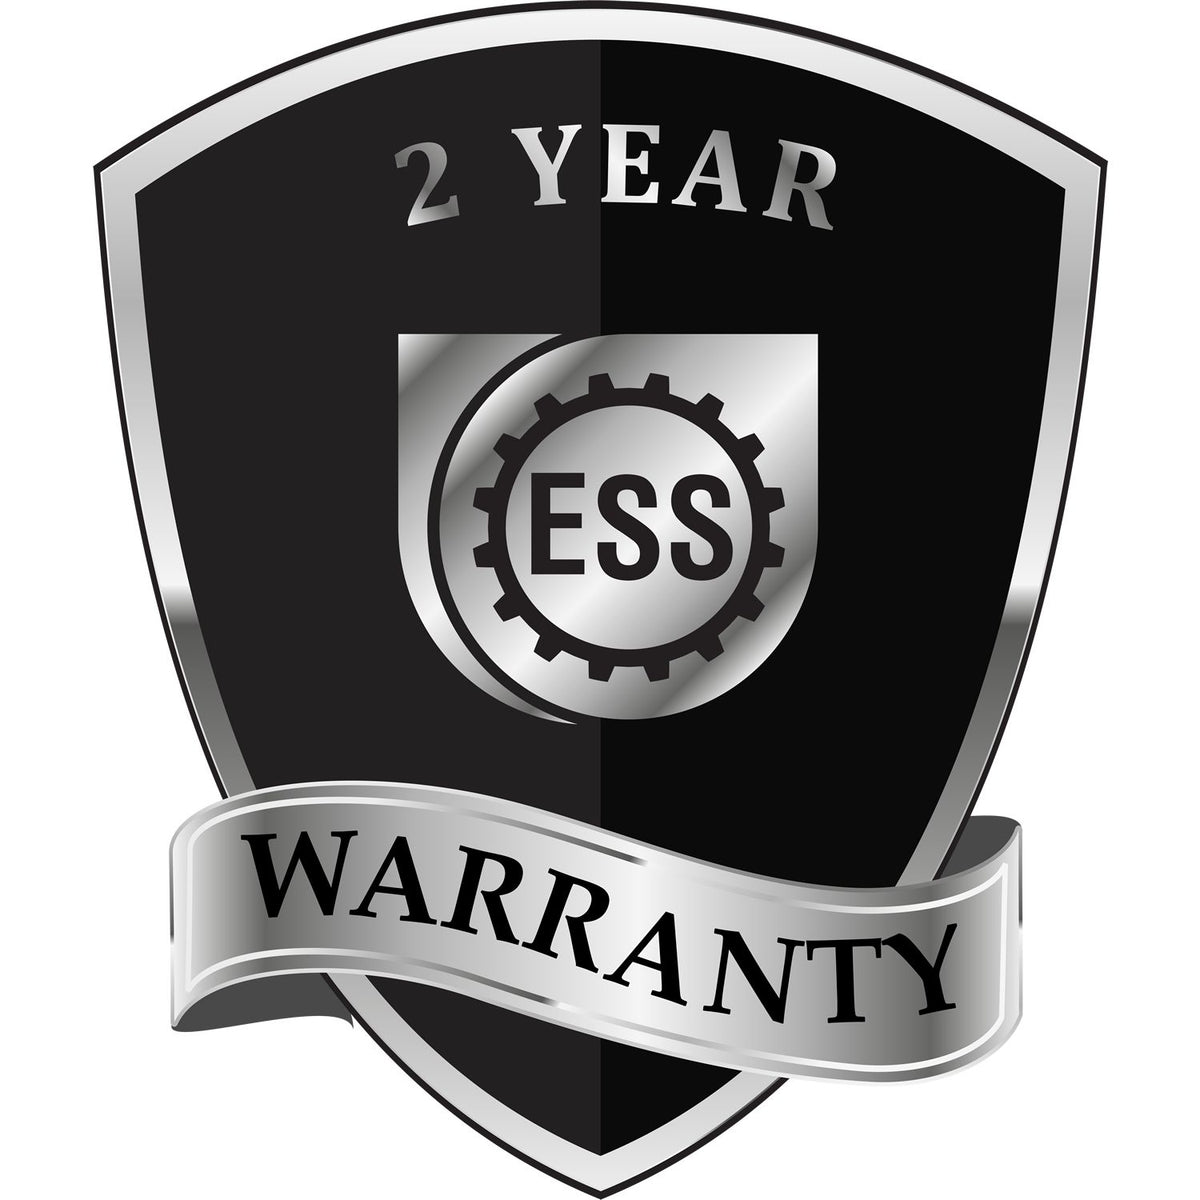 A black and silver badge or emblem showing warranty information for the Hybrid Kansas Geologist Seal